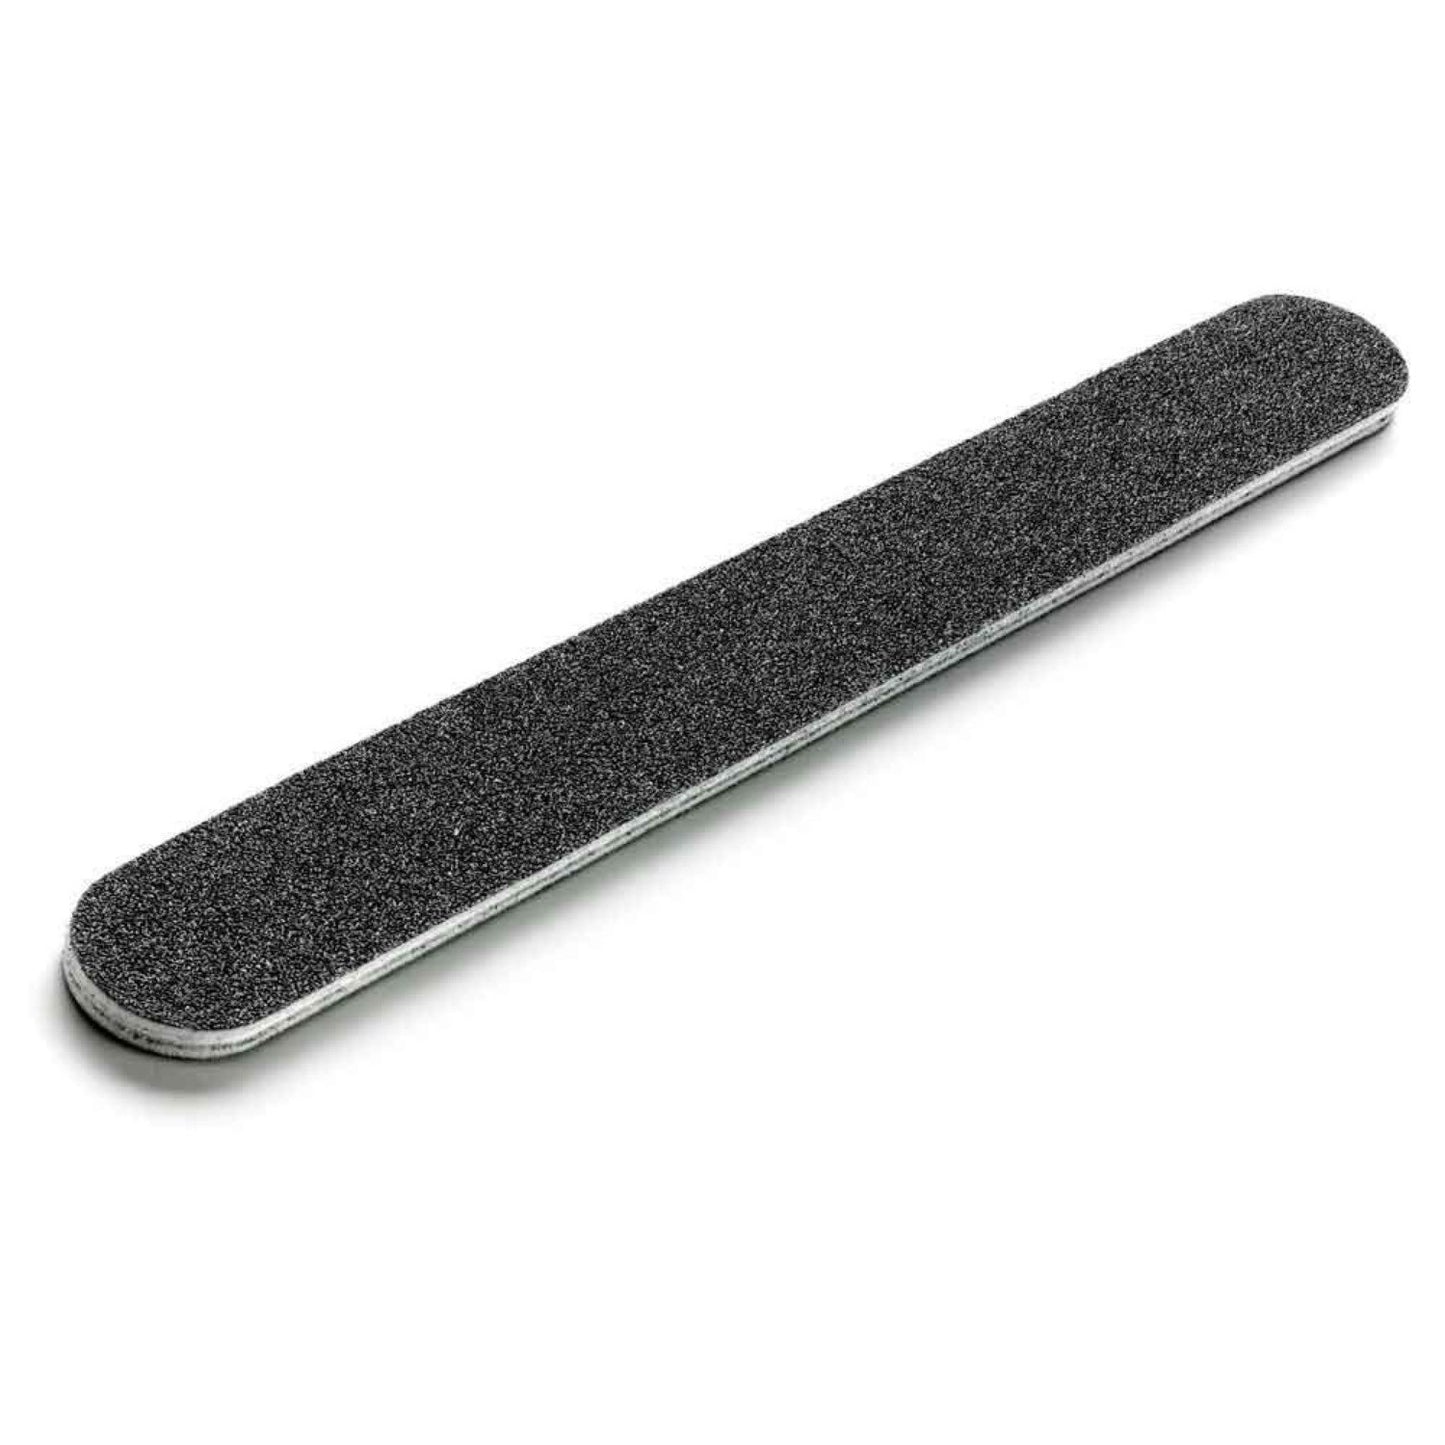 The Edge Nails Professional Duraboard Nail File 180/240 (Pack Of 10)